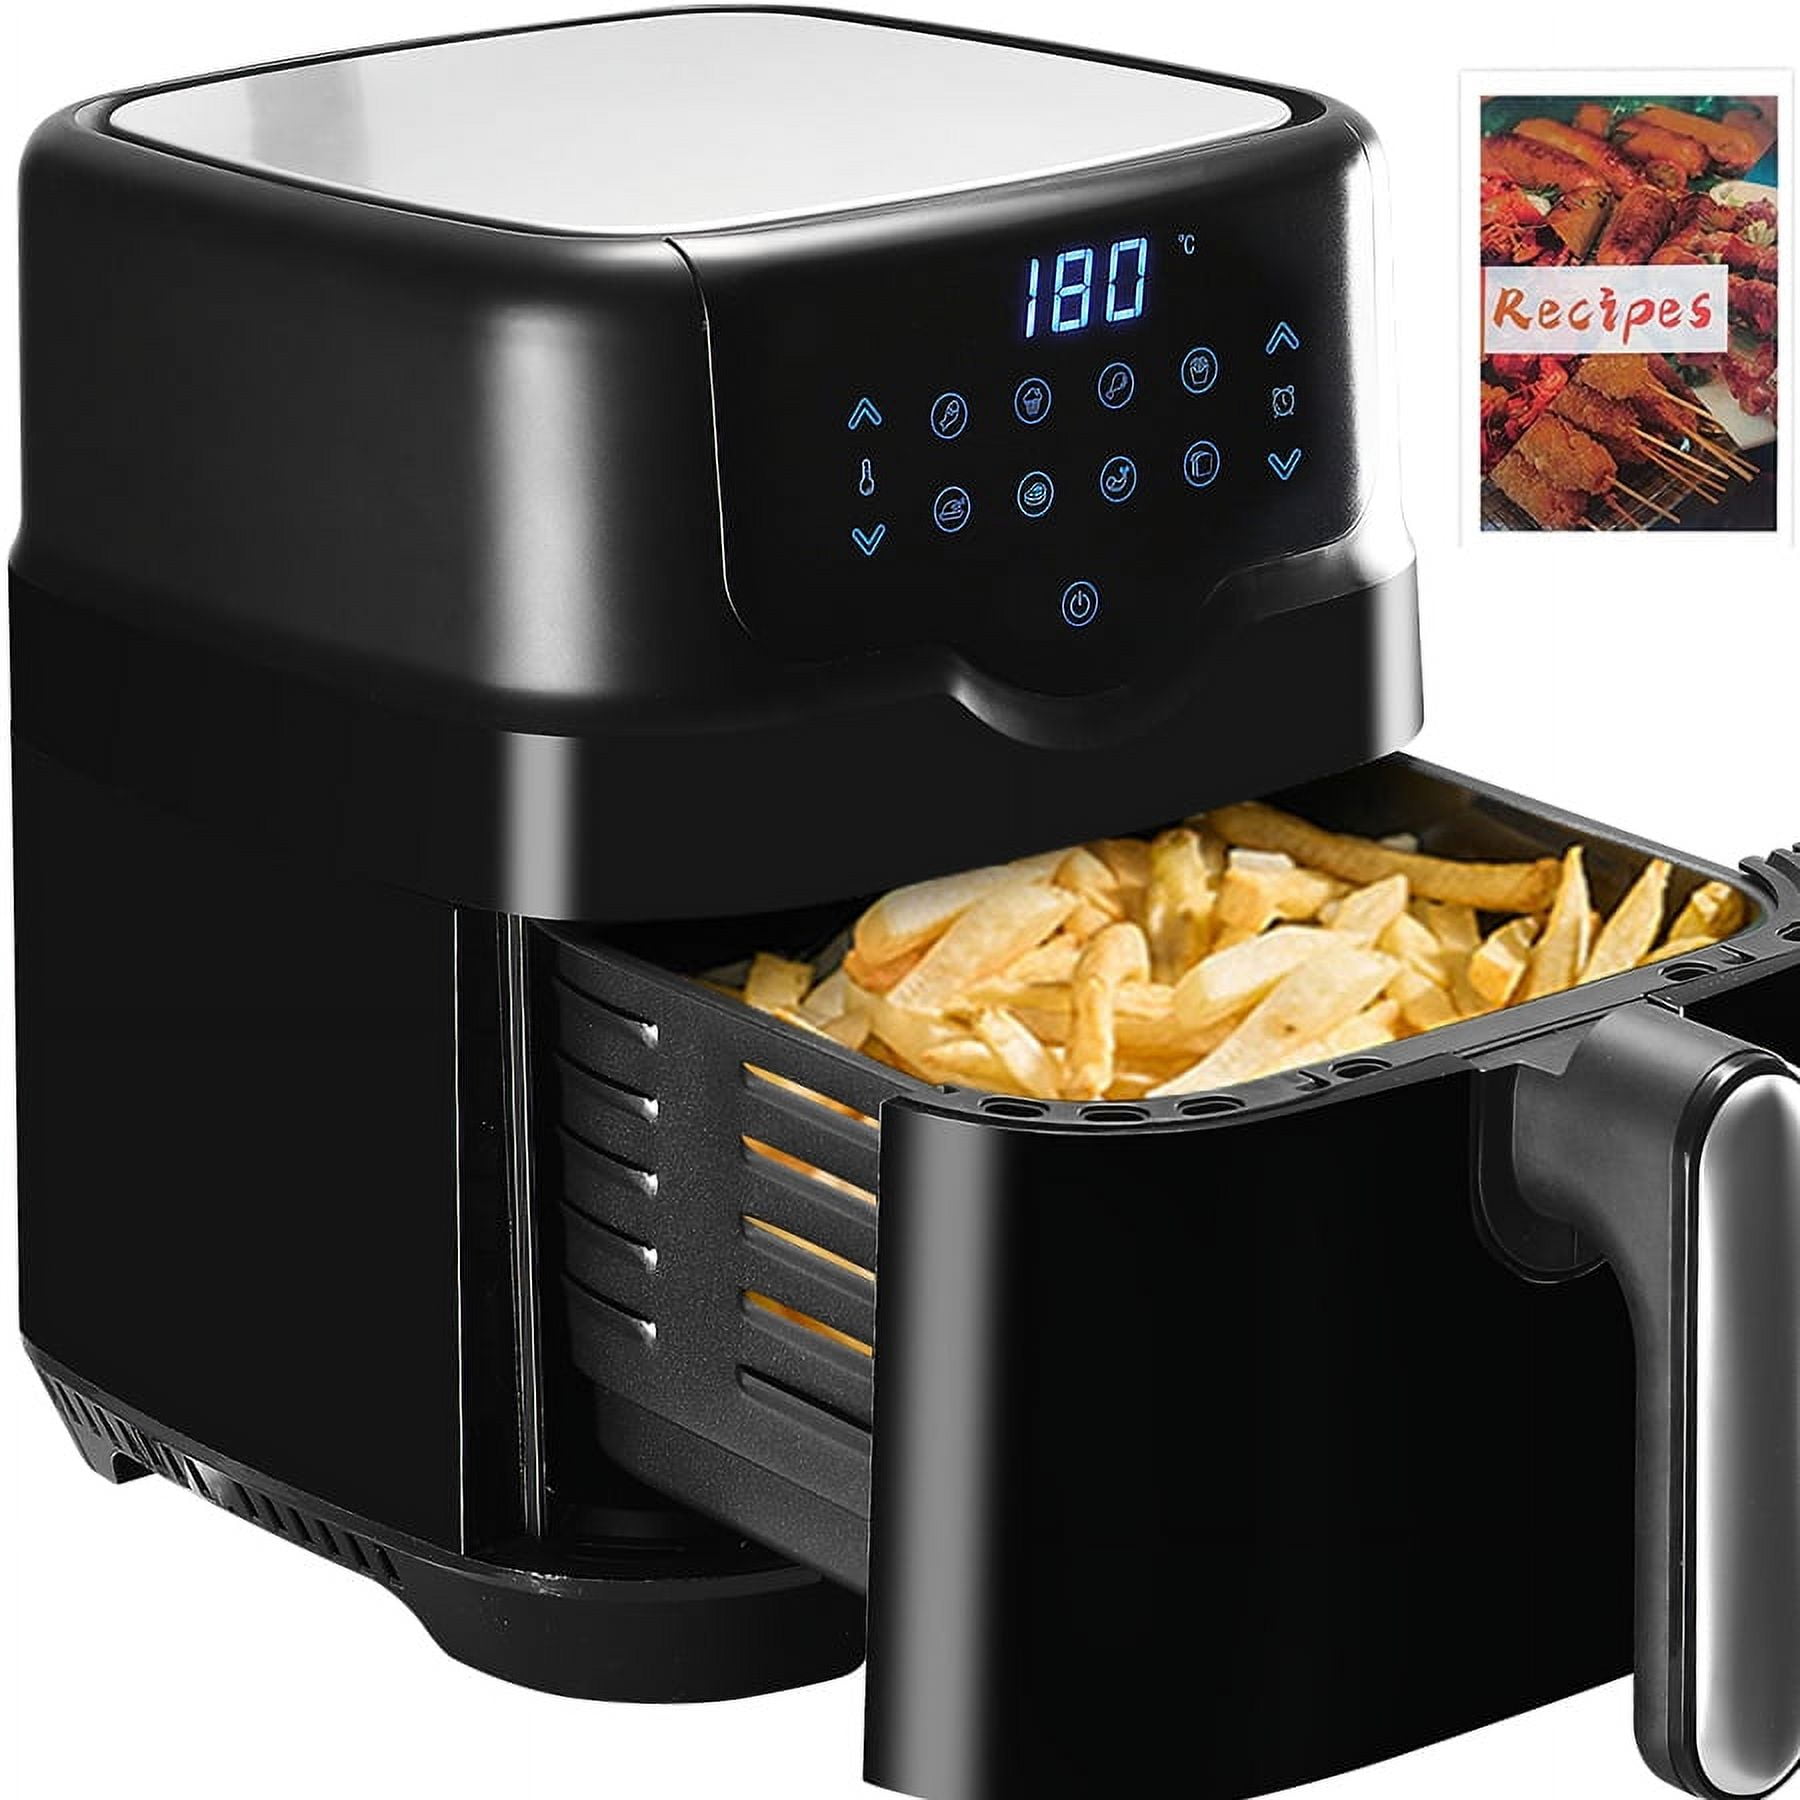 Air Fryer 4.2 Qt, Fabuletta Smart Air Fryer Oven With 9 Cooking Functions,  Shake Reminder, Powerful 1550W Electric Air Fryer Oilless Cooker,Tempered  Glass Display, Nonstick Dishwasher-Safe Basket 